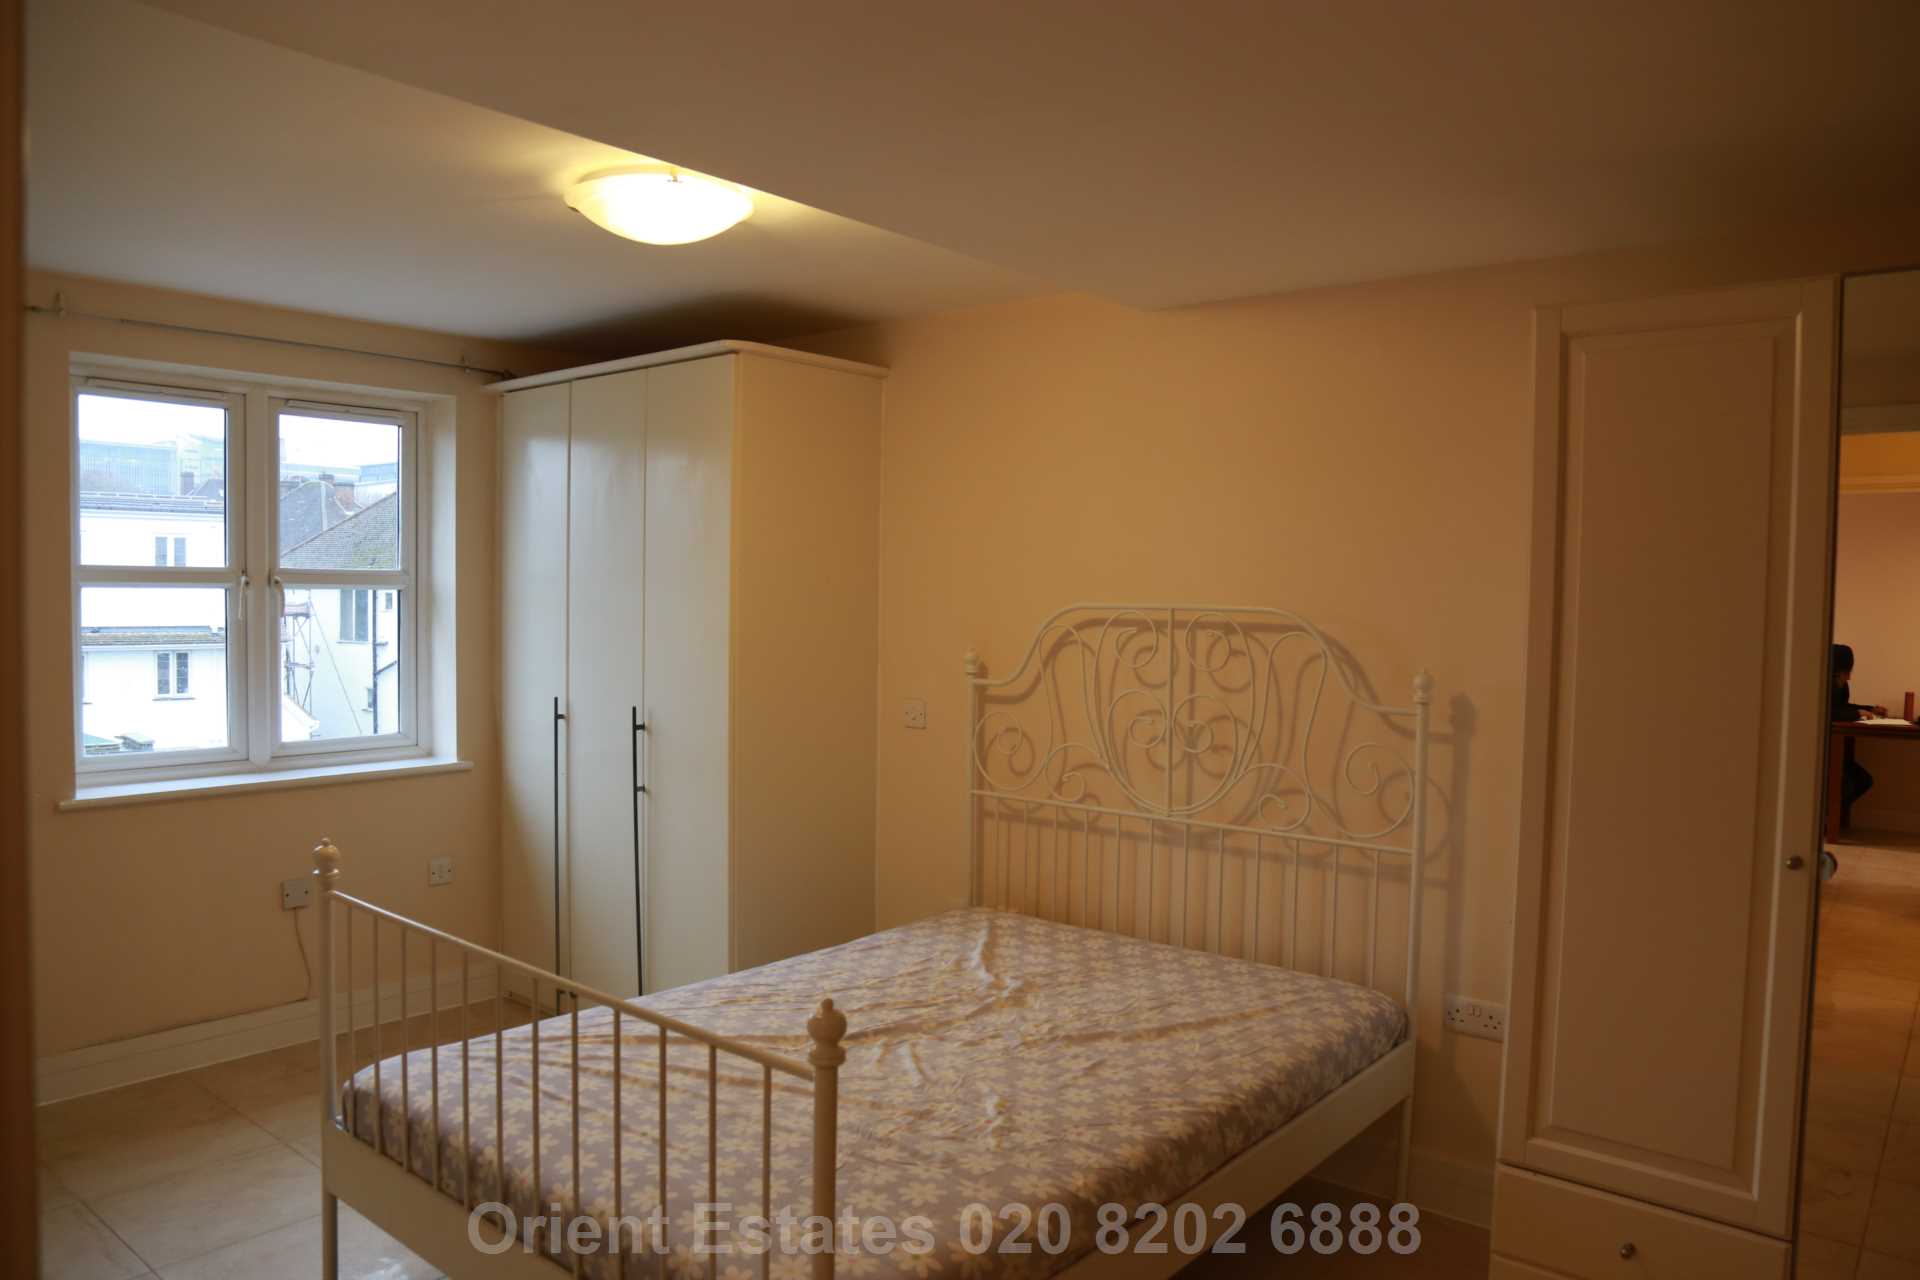 Peaberry Court, Greyhound Hill, Hendon, NW4, Image 2